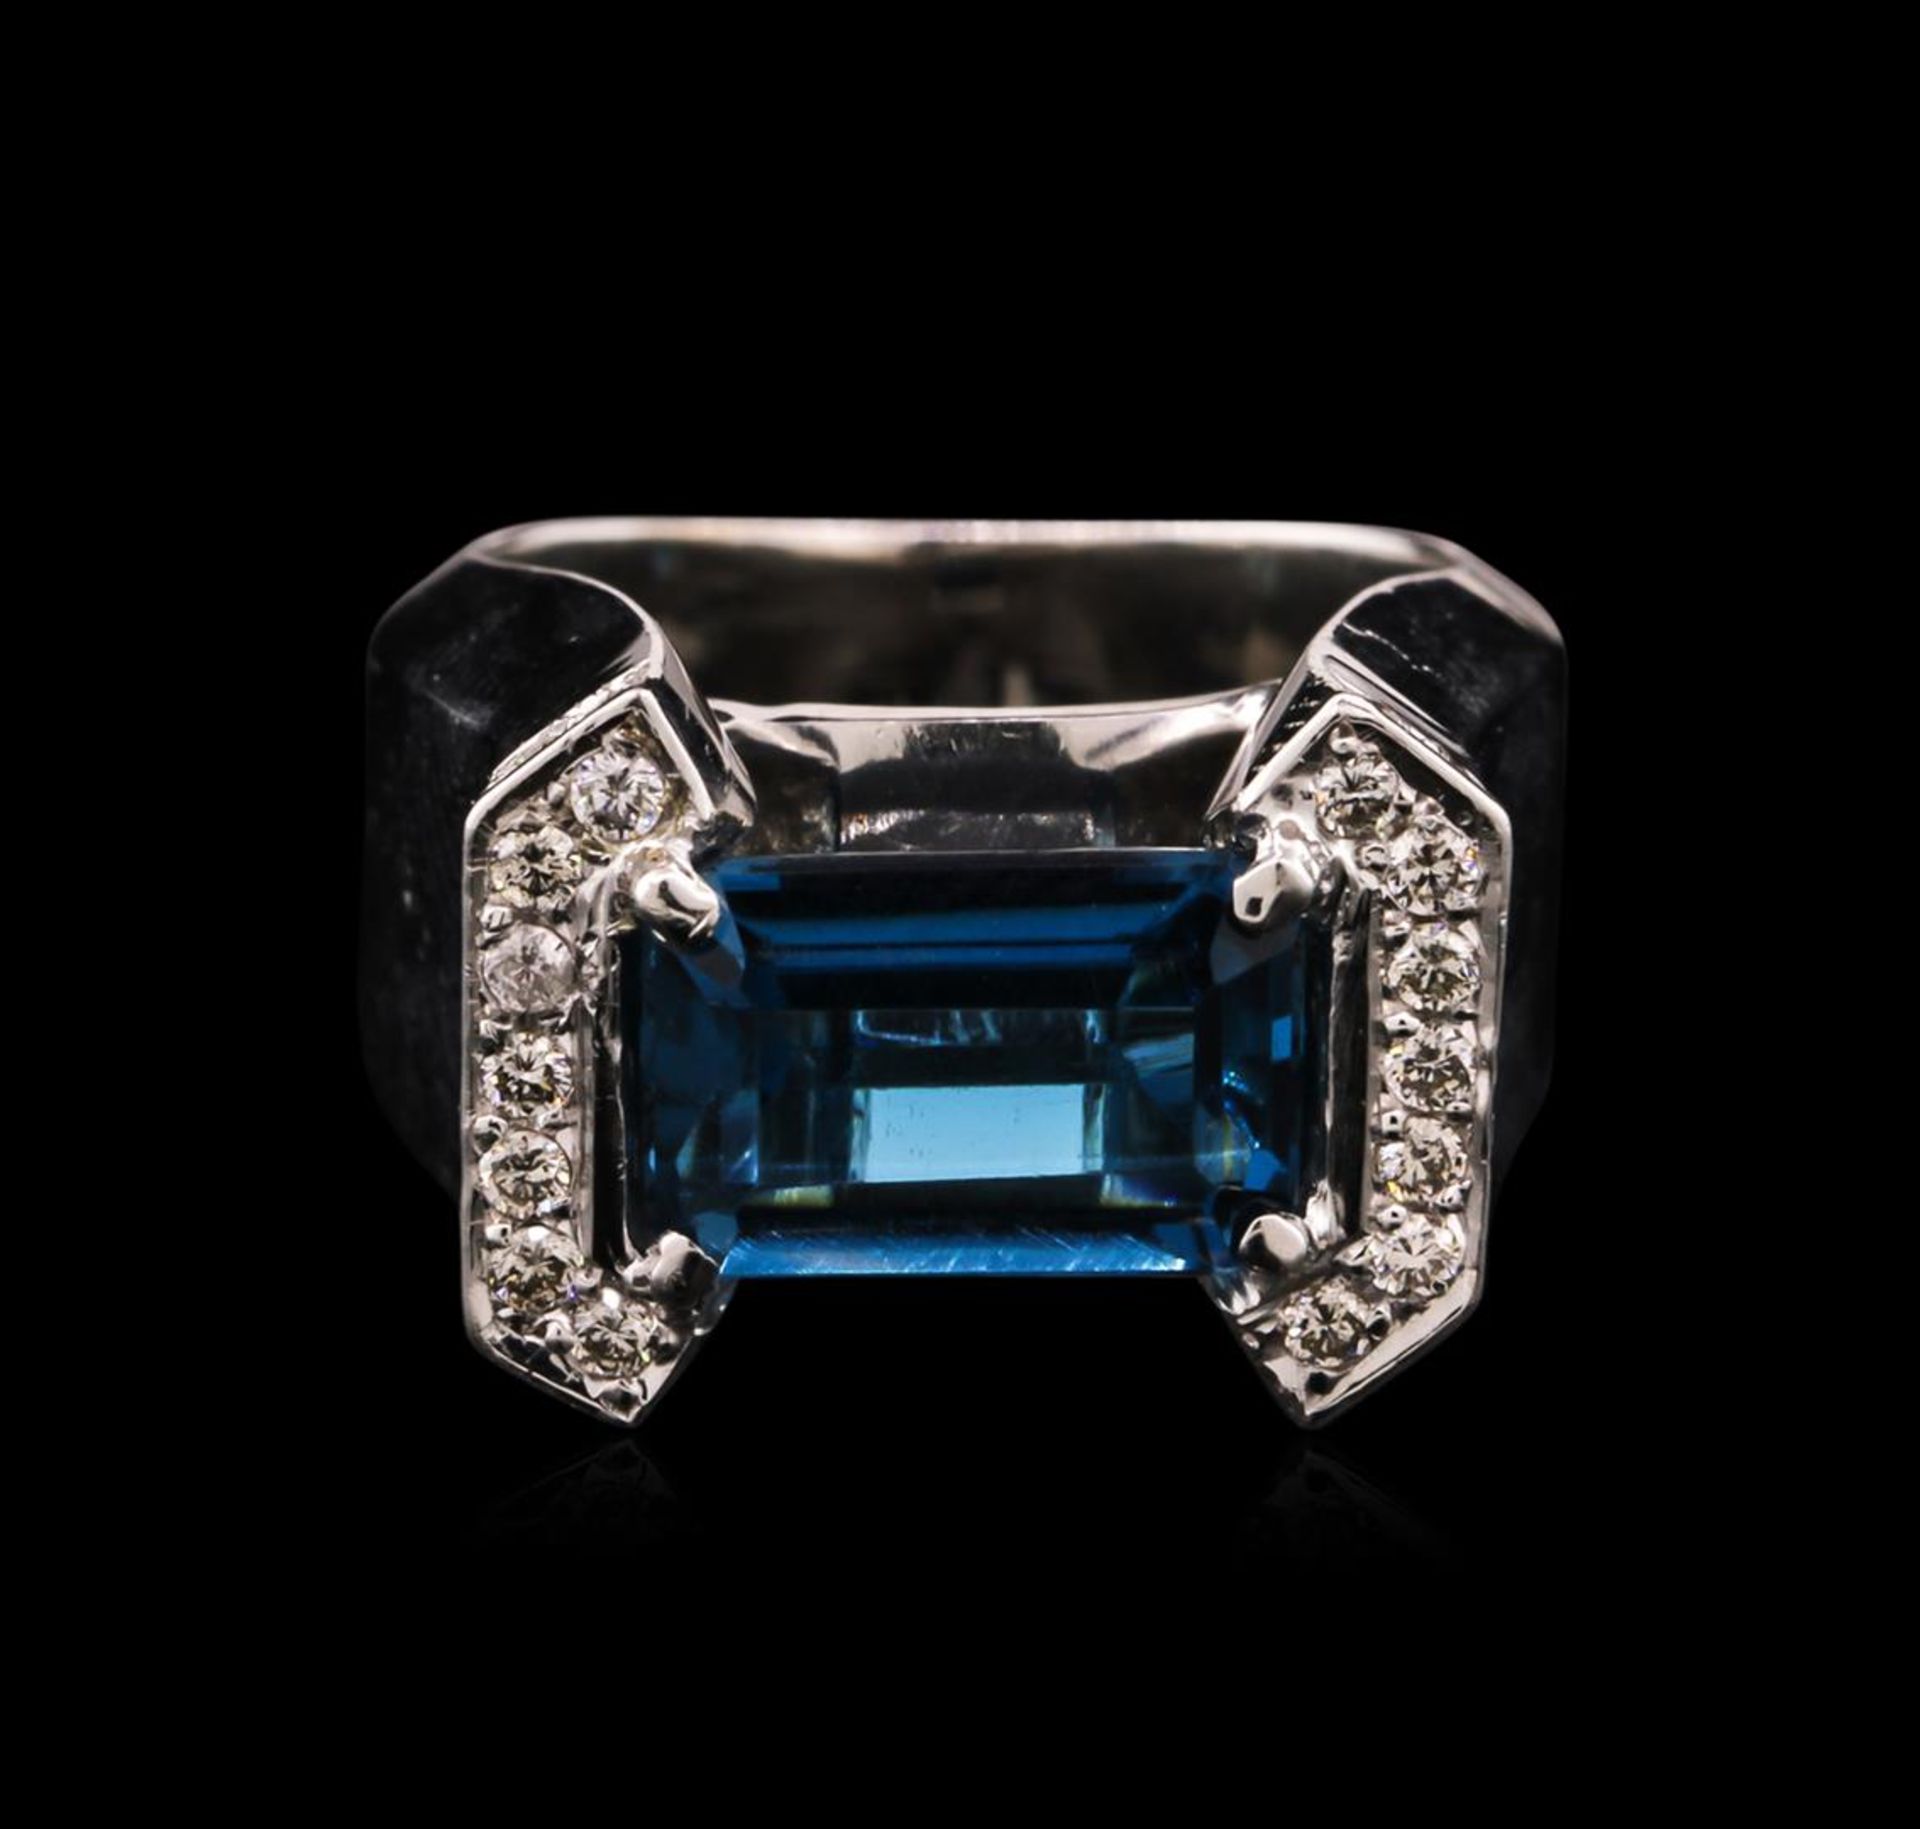 3.50 ctw Blue Topaz and Diamond Ring - 14KT White Gold - Image 2 of 2